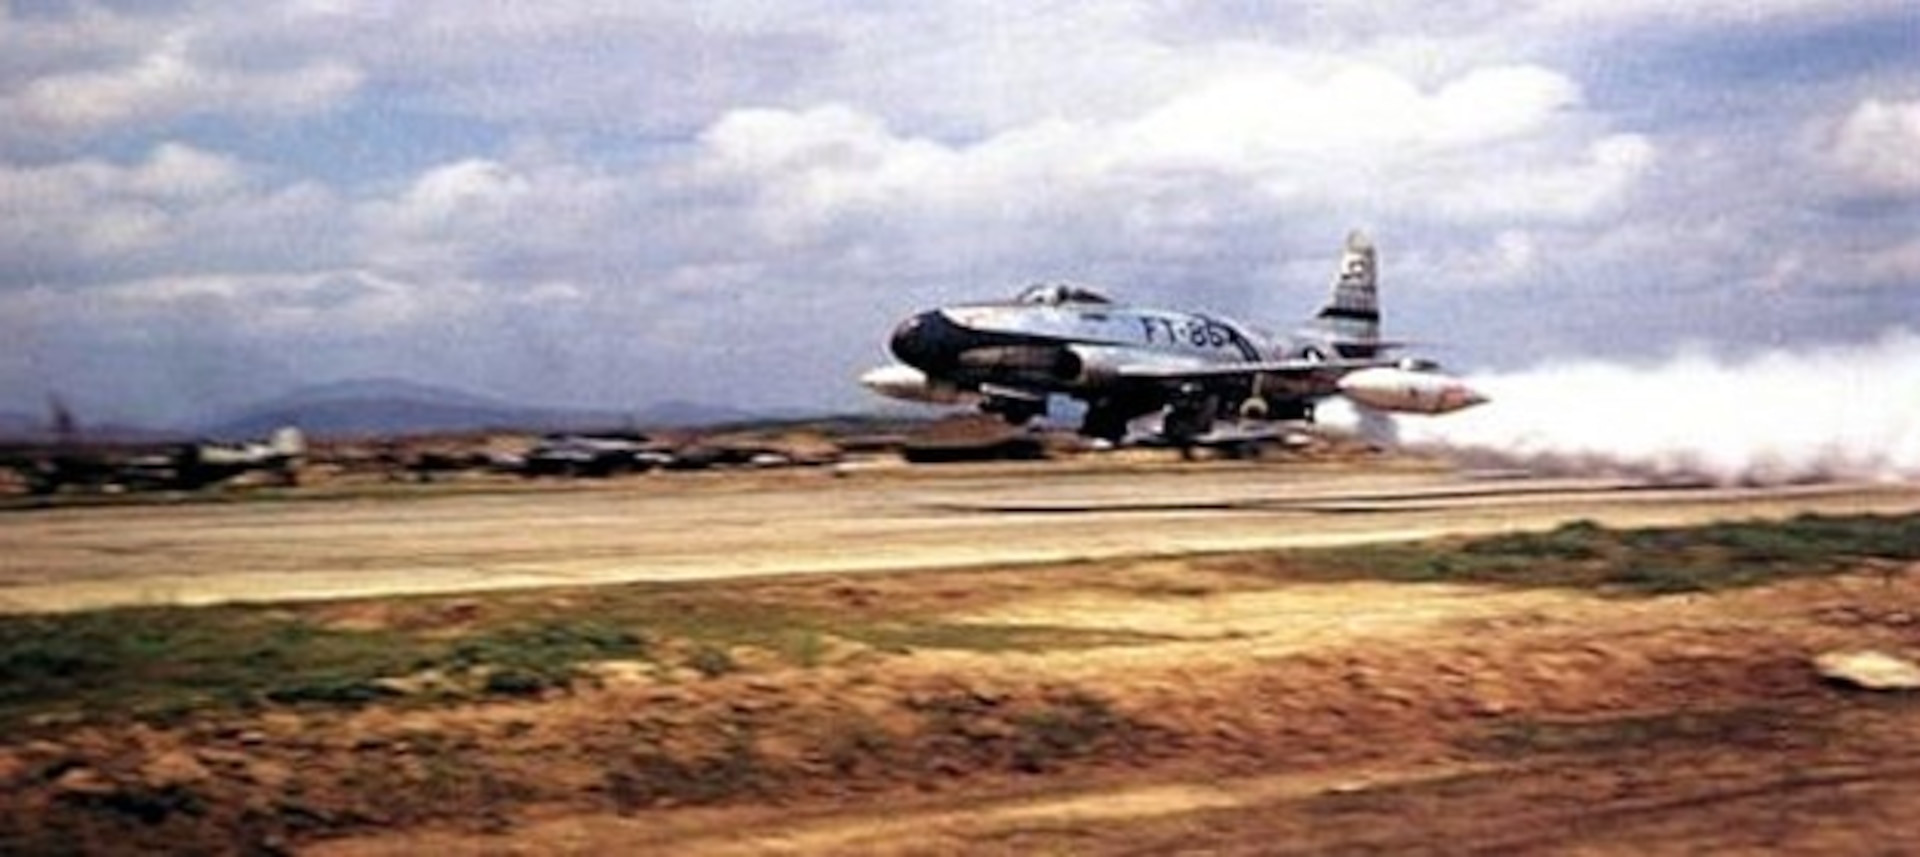 A U.S. Air force F-80C Shooting Star assigned to the 51st Fighter-Interceptor Wing, takes off from Suwon Air Base, Republic of Korea, with the assistance of a JATO bottle circa October 1951. On Dec. 15, 1950, to aid in the defense of the U.S. Army the 51st Fighter-Interceptor Wing flew F-80C Shooting Stars, signifying the start of a week-long close air support mission for the 2nd Infantry Division withdrawal from North Korea. In just three days, the 51 FIW conducted over 750 sorties. (Courtesy photo)